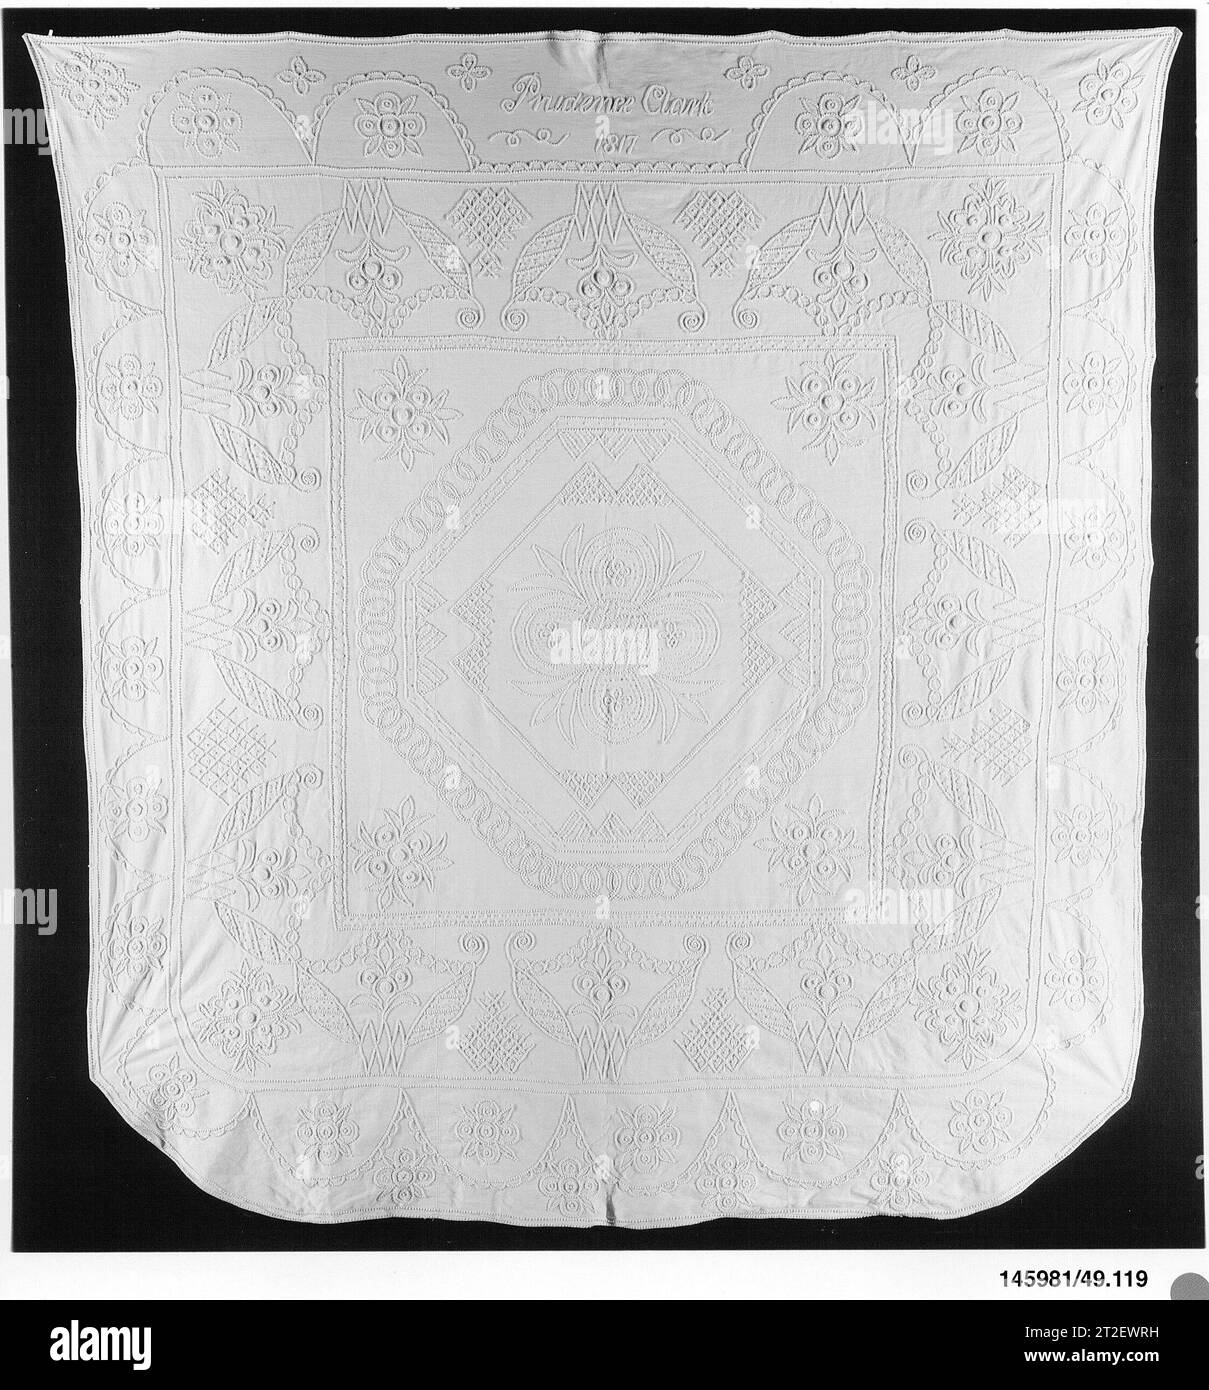 Embroidered whitework coverlet Prudence Clark American 1817 Three panels of a linen/cotton ribbed fabric are seamed together to form the base of this whitework coverlet. The piece is embroidered in loops with heavy white cotton thread. The central medallion is set within an octagon of interlocking rings, which in turn is surrounded by two abstract floral borders. Stock Photo